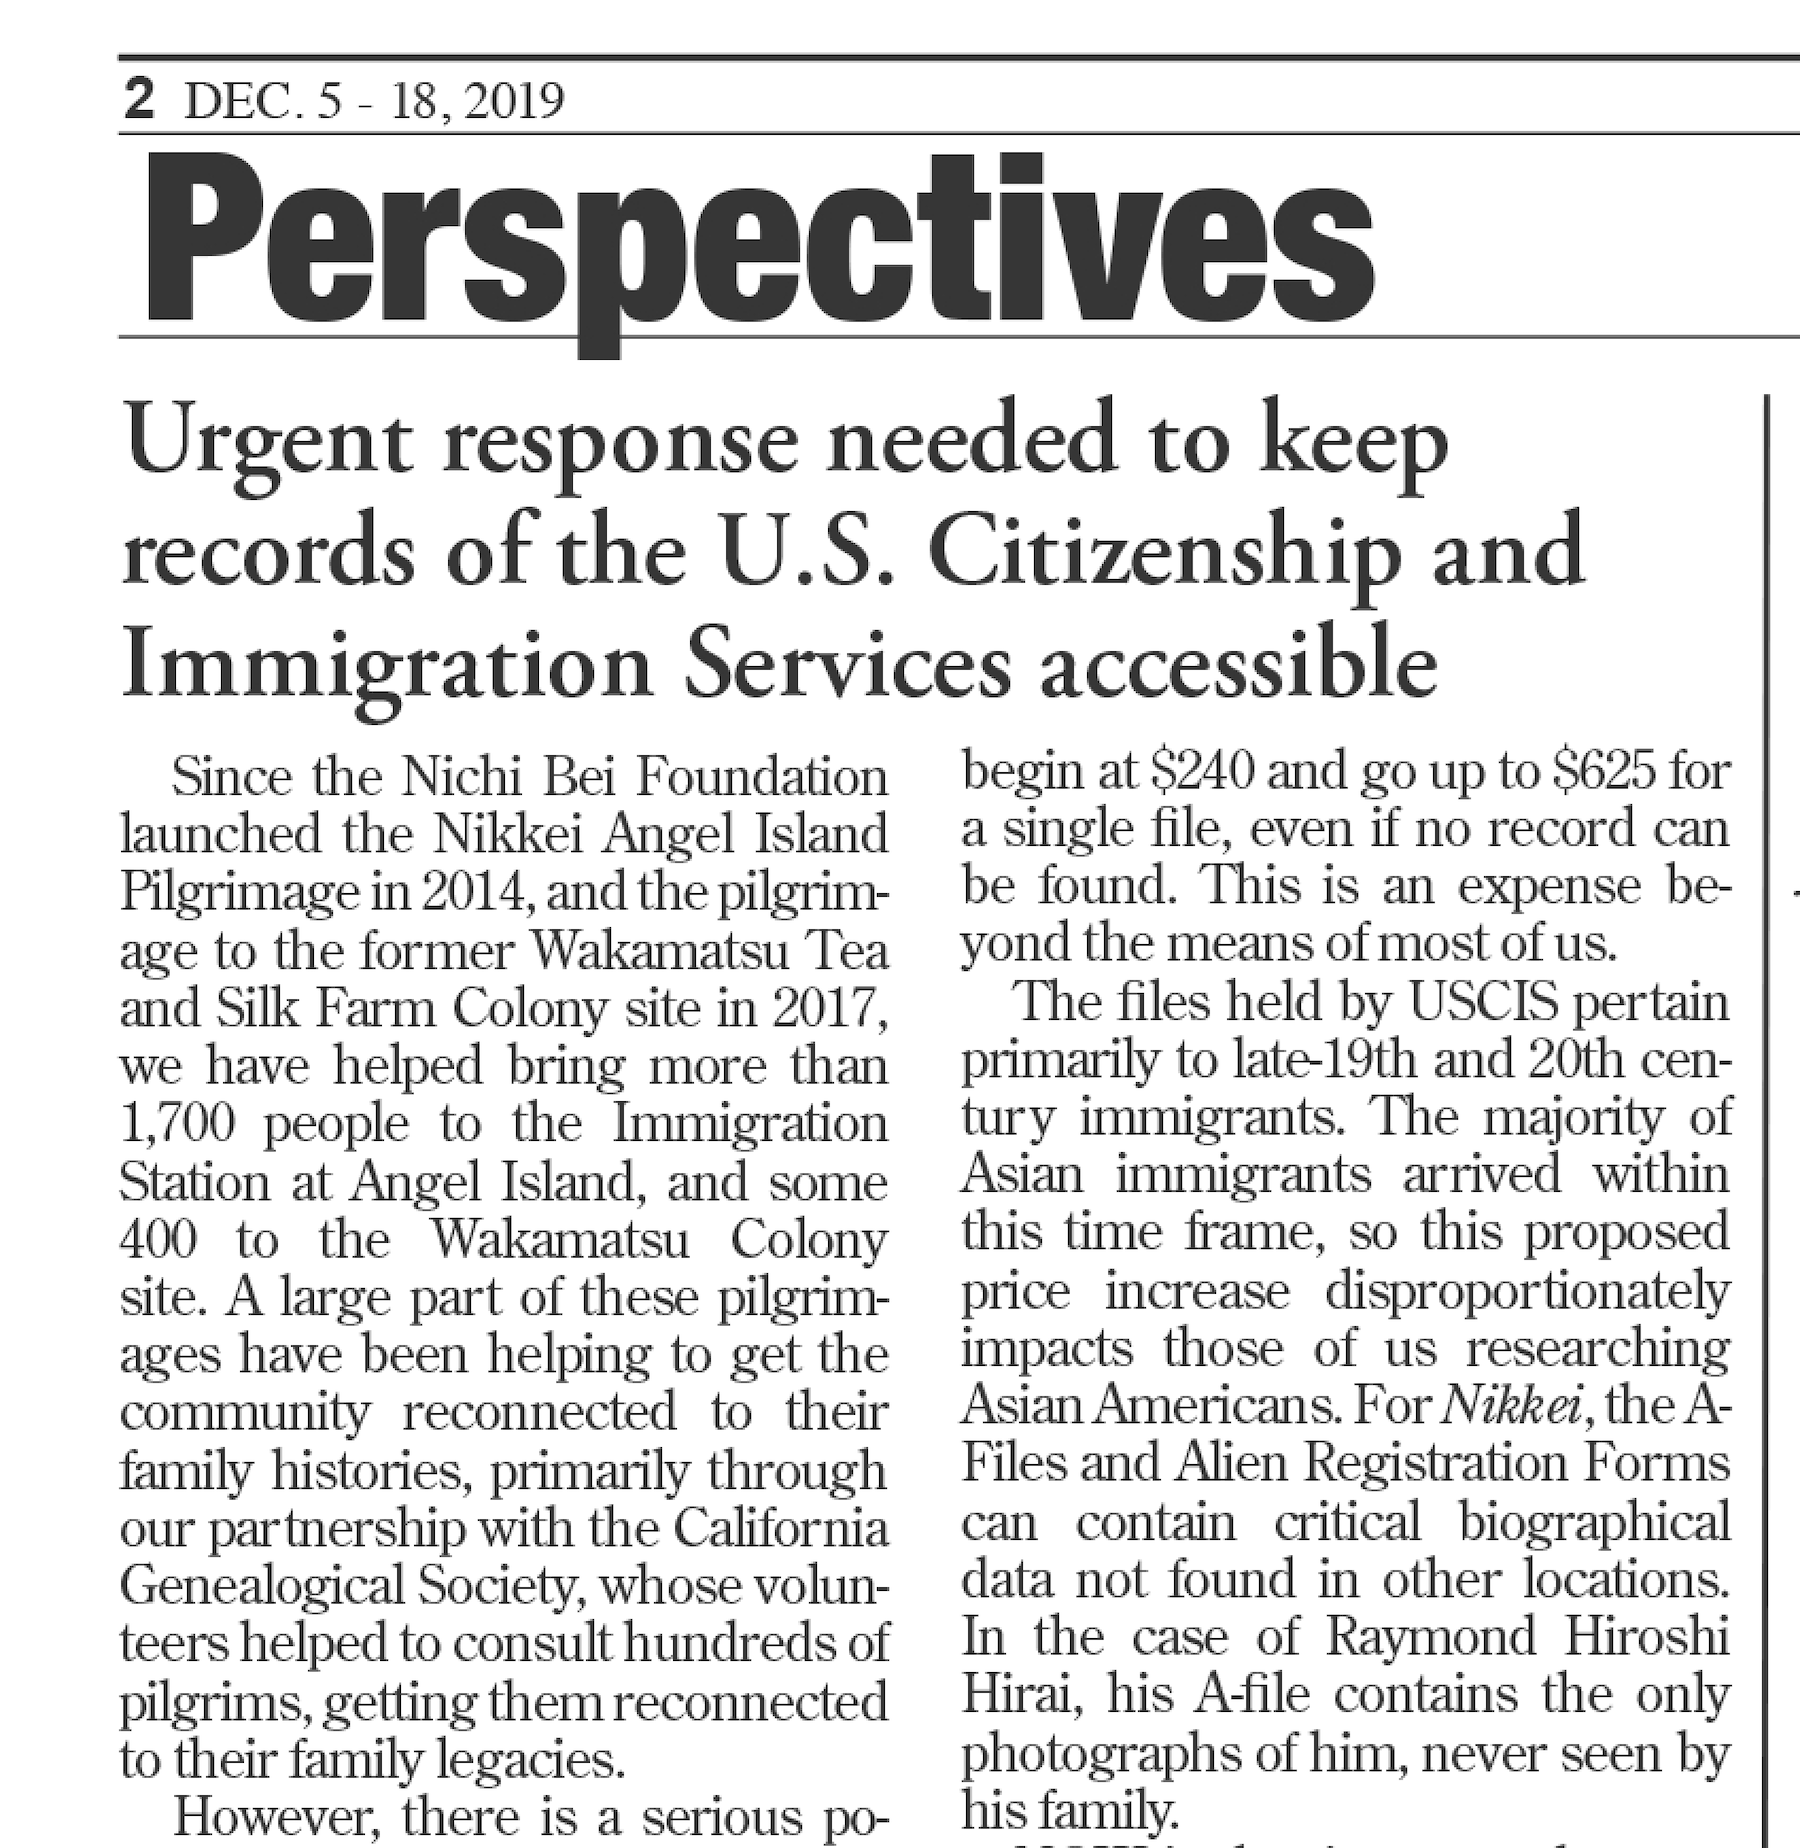 Urgent response needed to keep records of the U.S. Citizenship and Immigration Services accessible